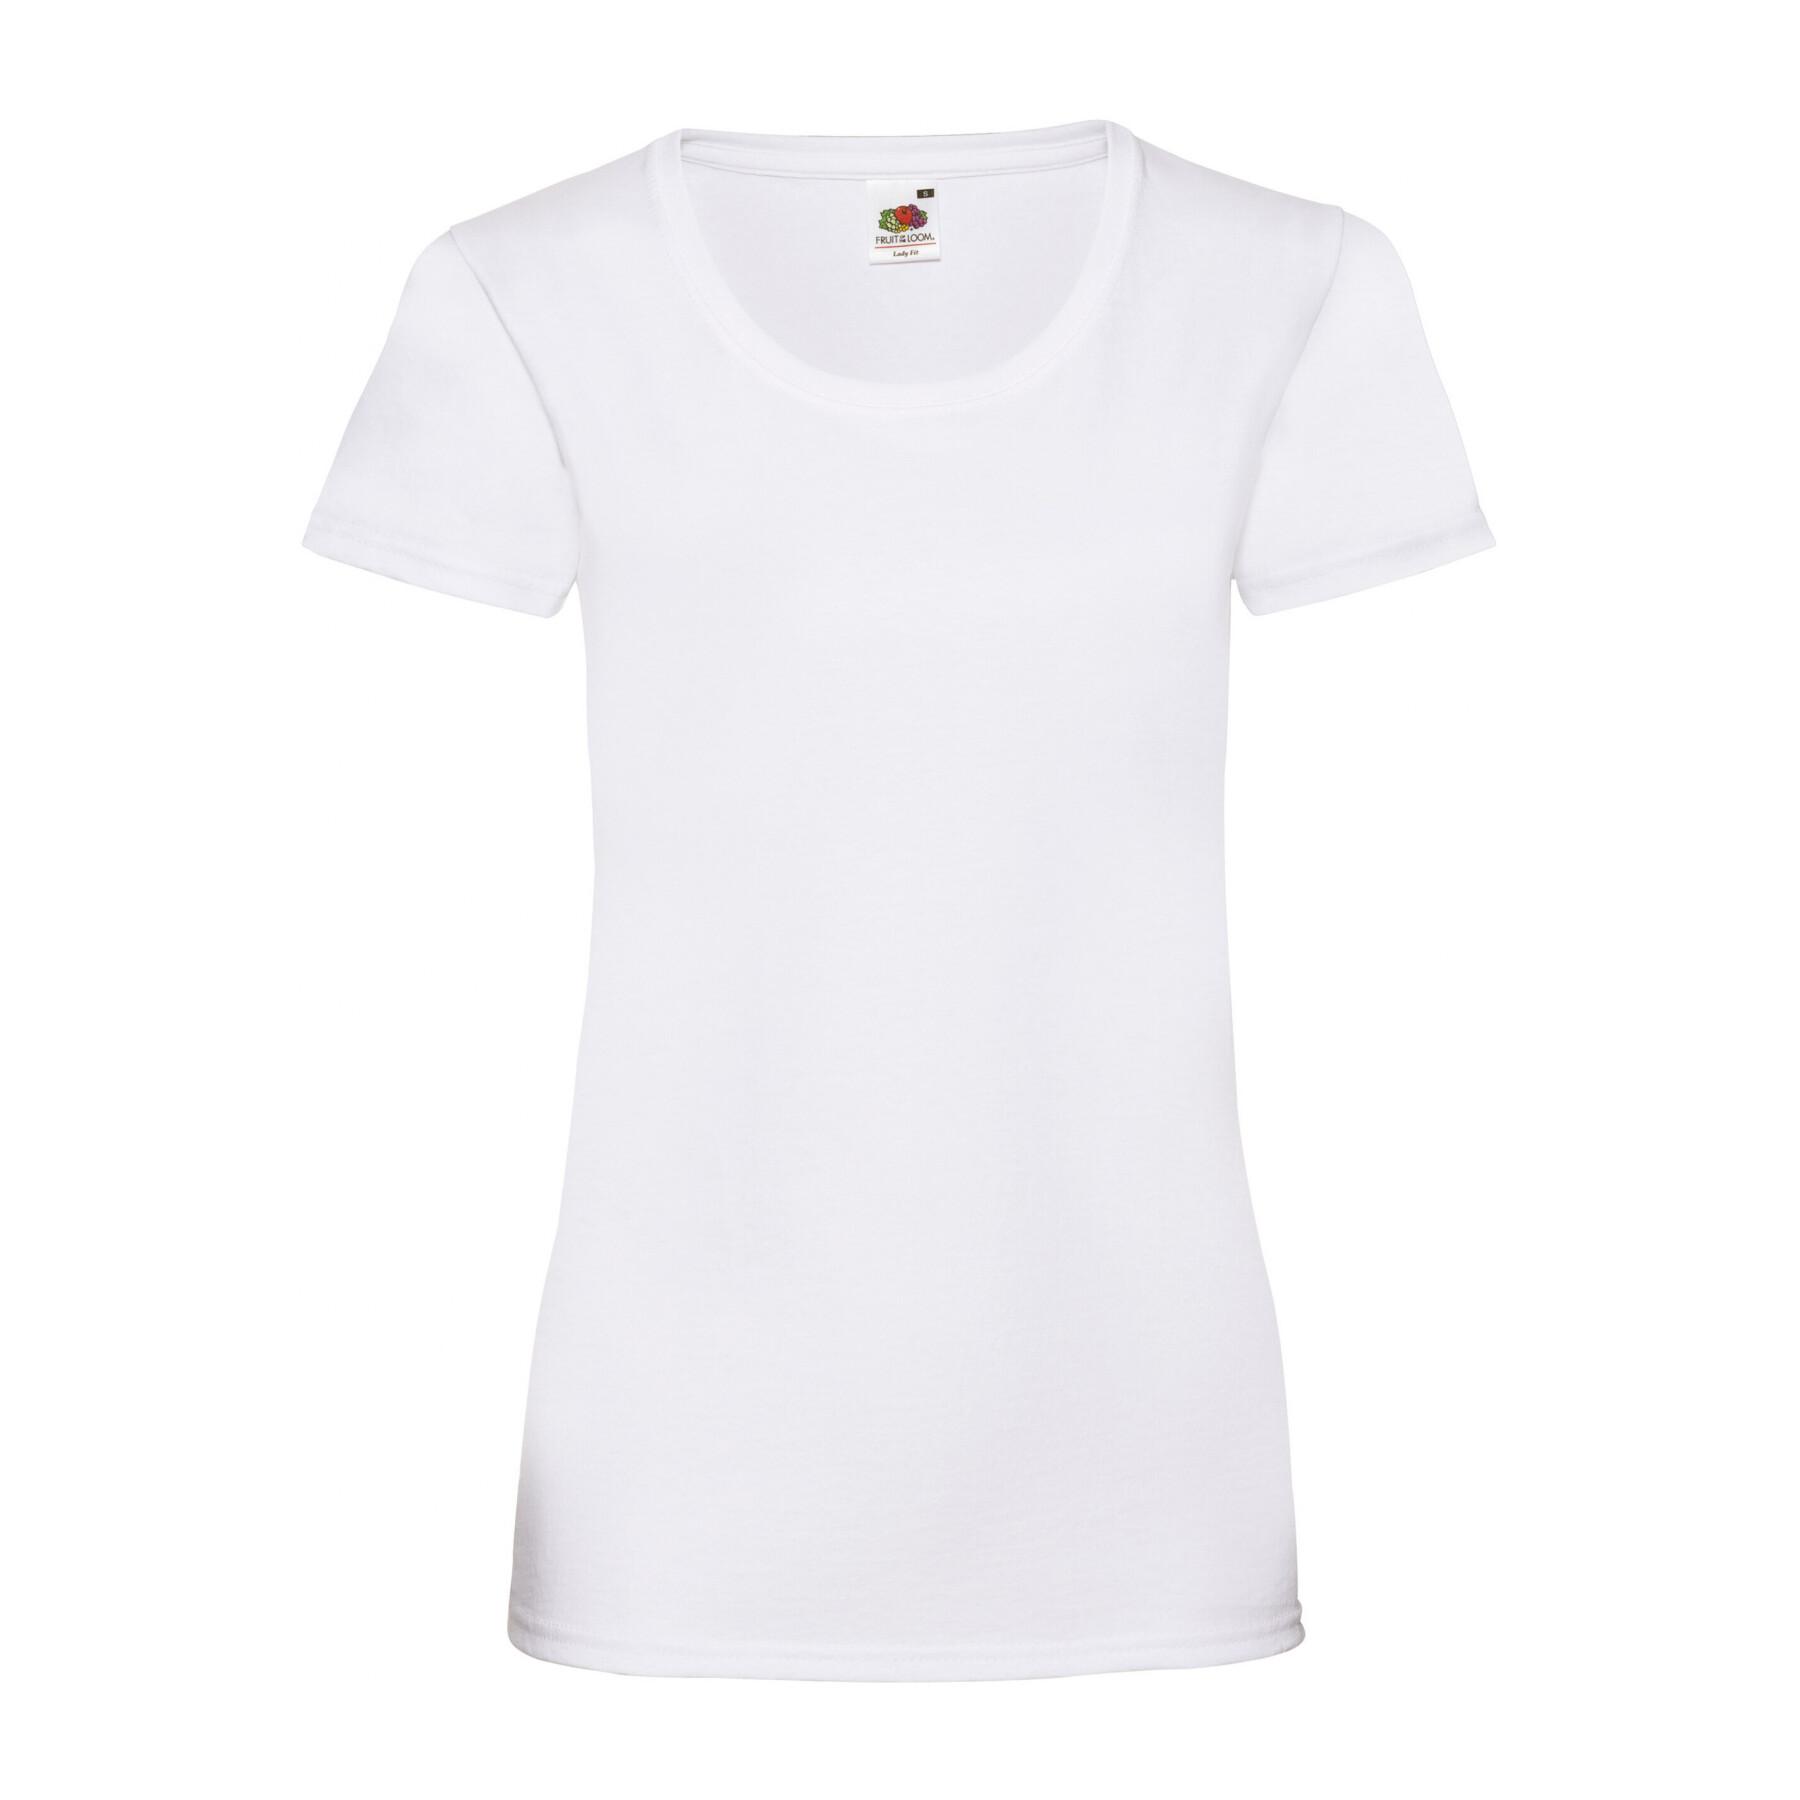 Women's T-shirt Fruit of the Loom Valueweight 61-372-0